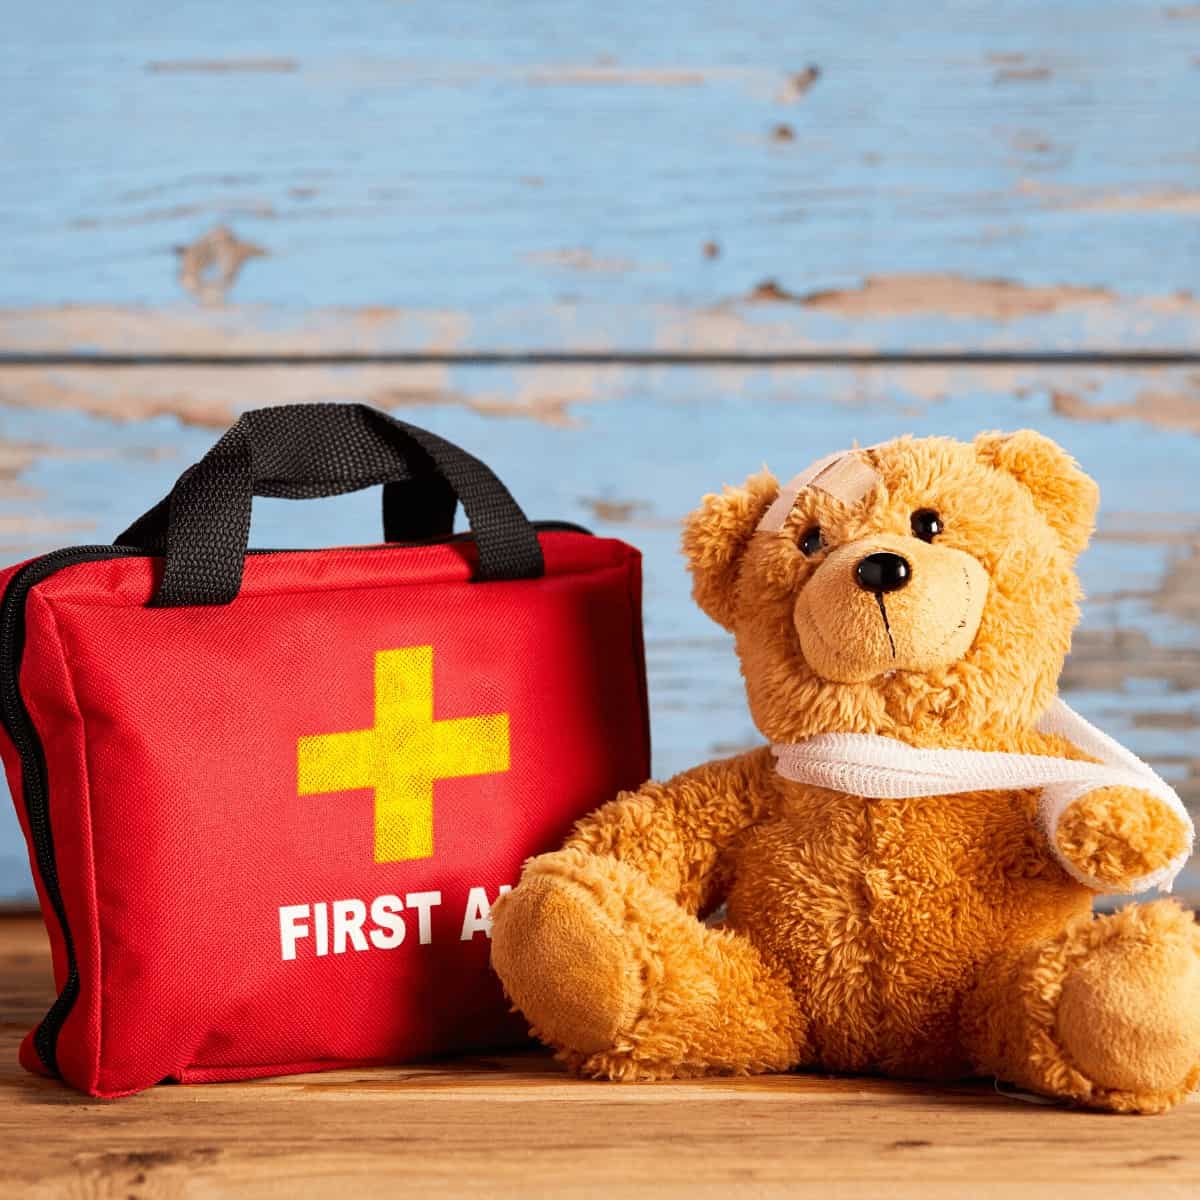 brown-teddy-bear-in-front-of-blue-wall-sitting-next-to-first-aid-kit